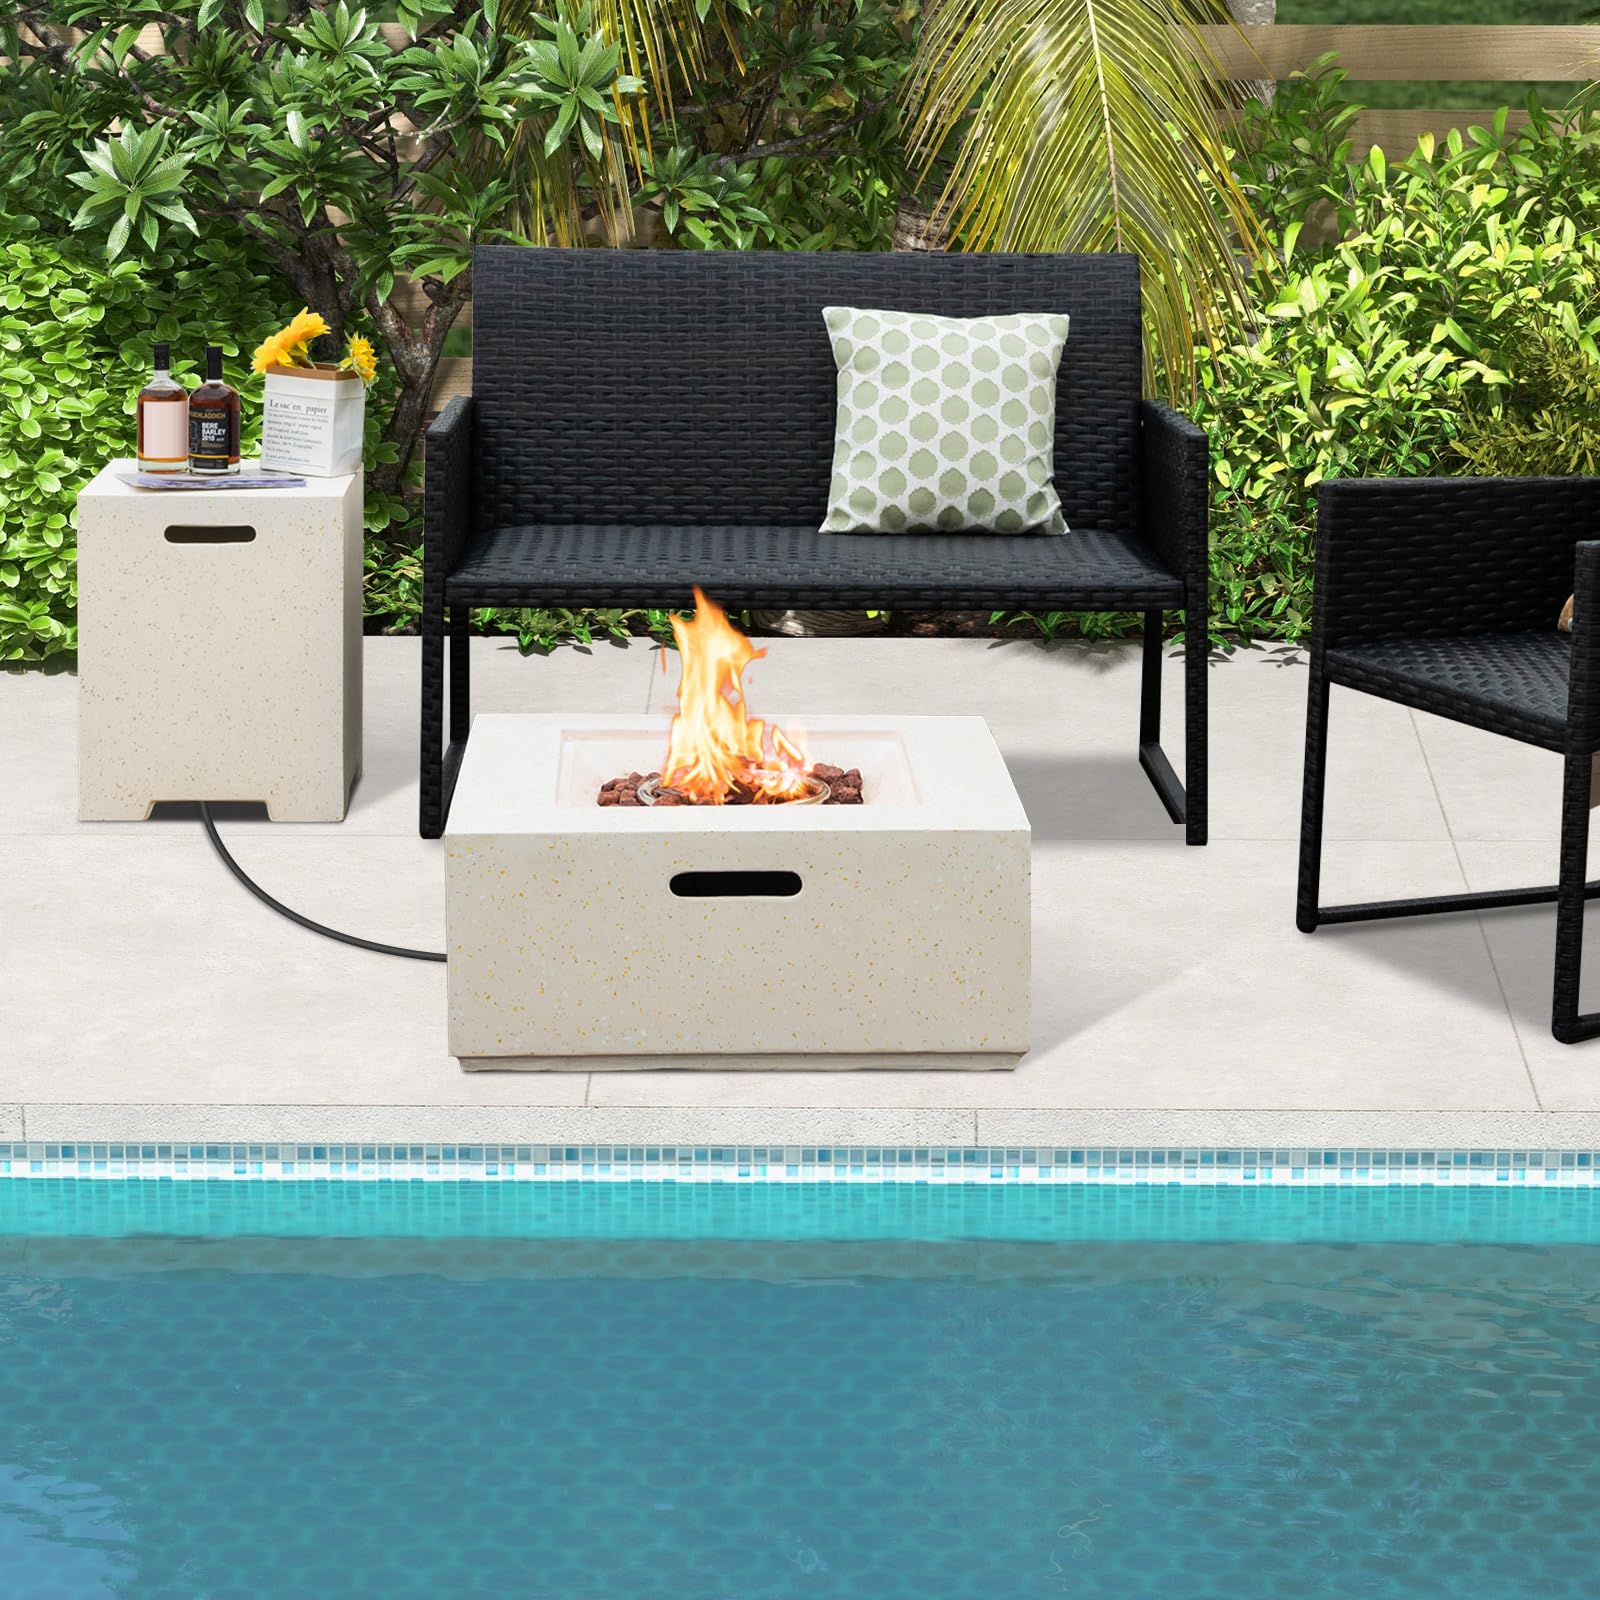 Giantex Propane Fire Pit Table Set, 40,000 BTU 28" Terrazzo Gas Fire Table w/ 16" Hideaway Tank Holder, Protective Covers